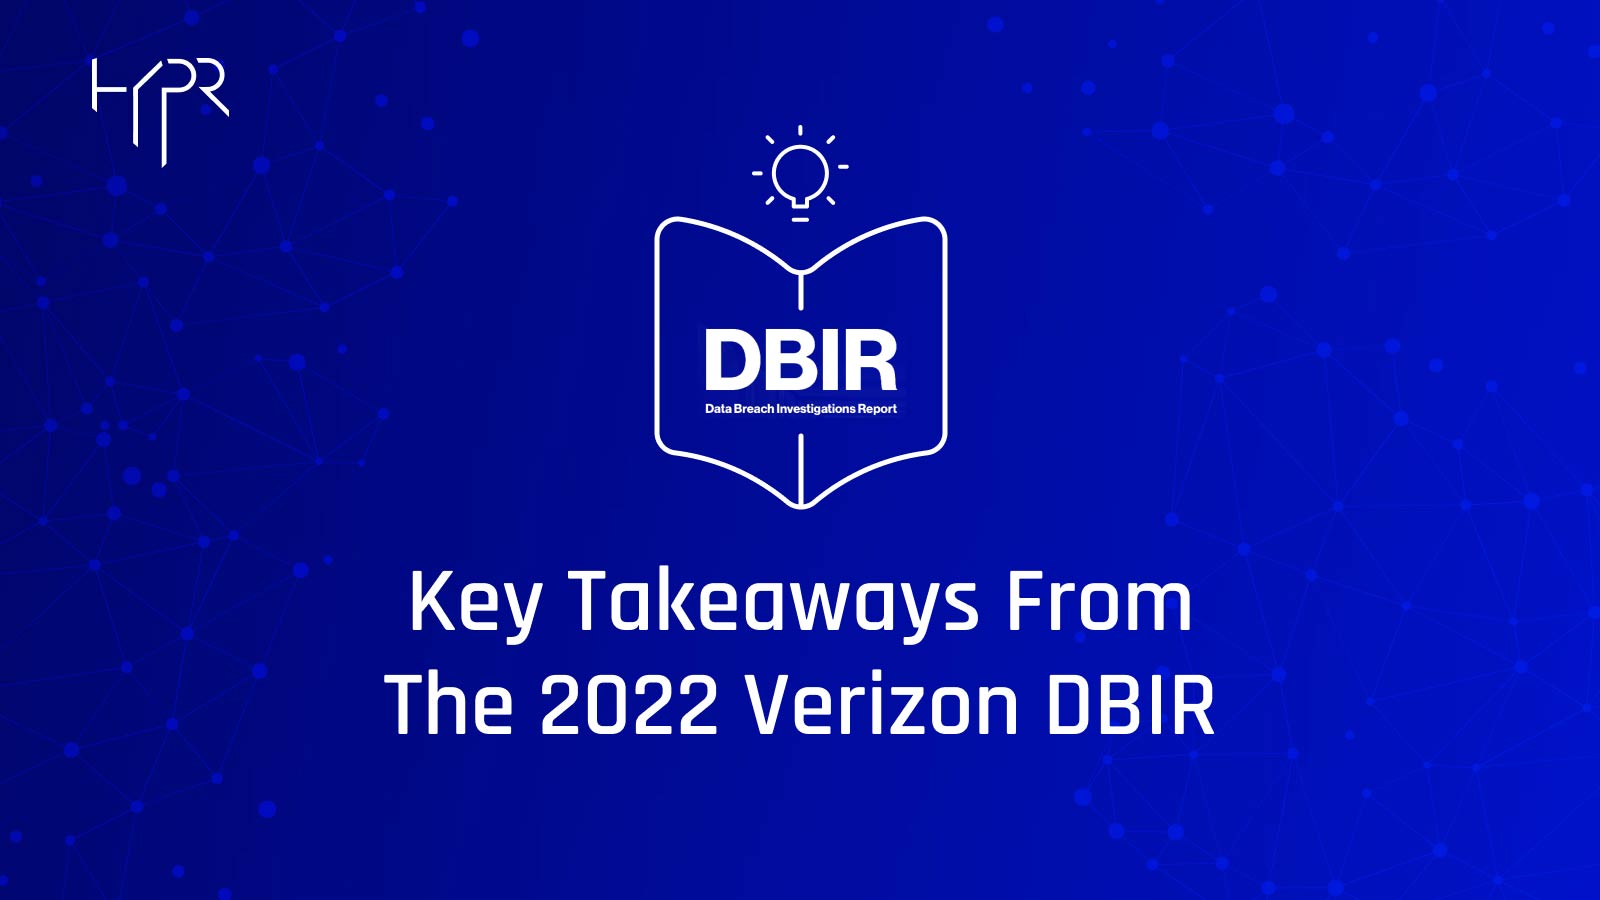 Takeaways From the 2022 DBIR: It All Comes Back to Passwords